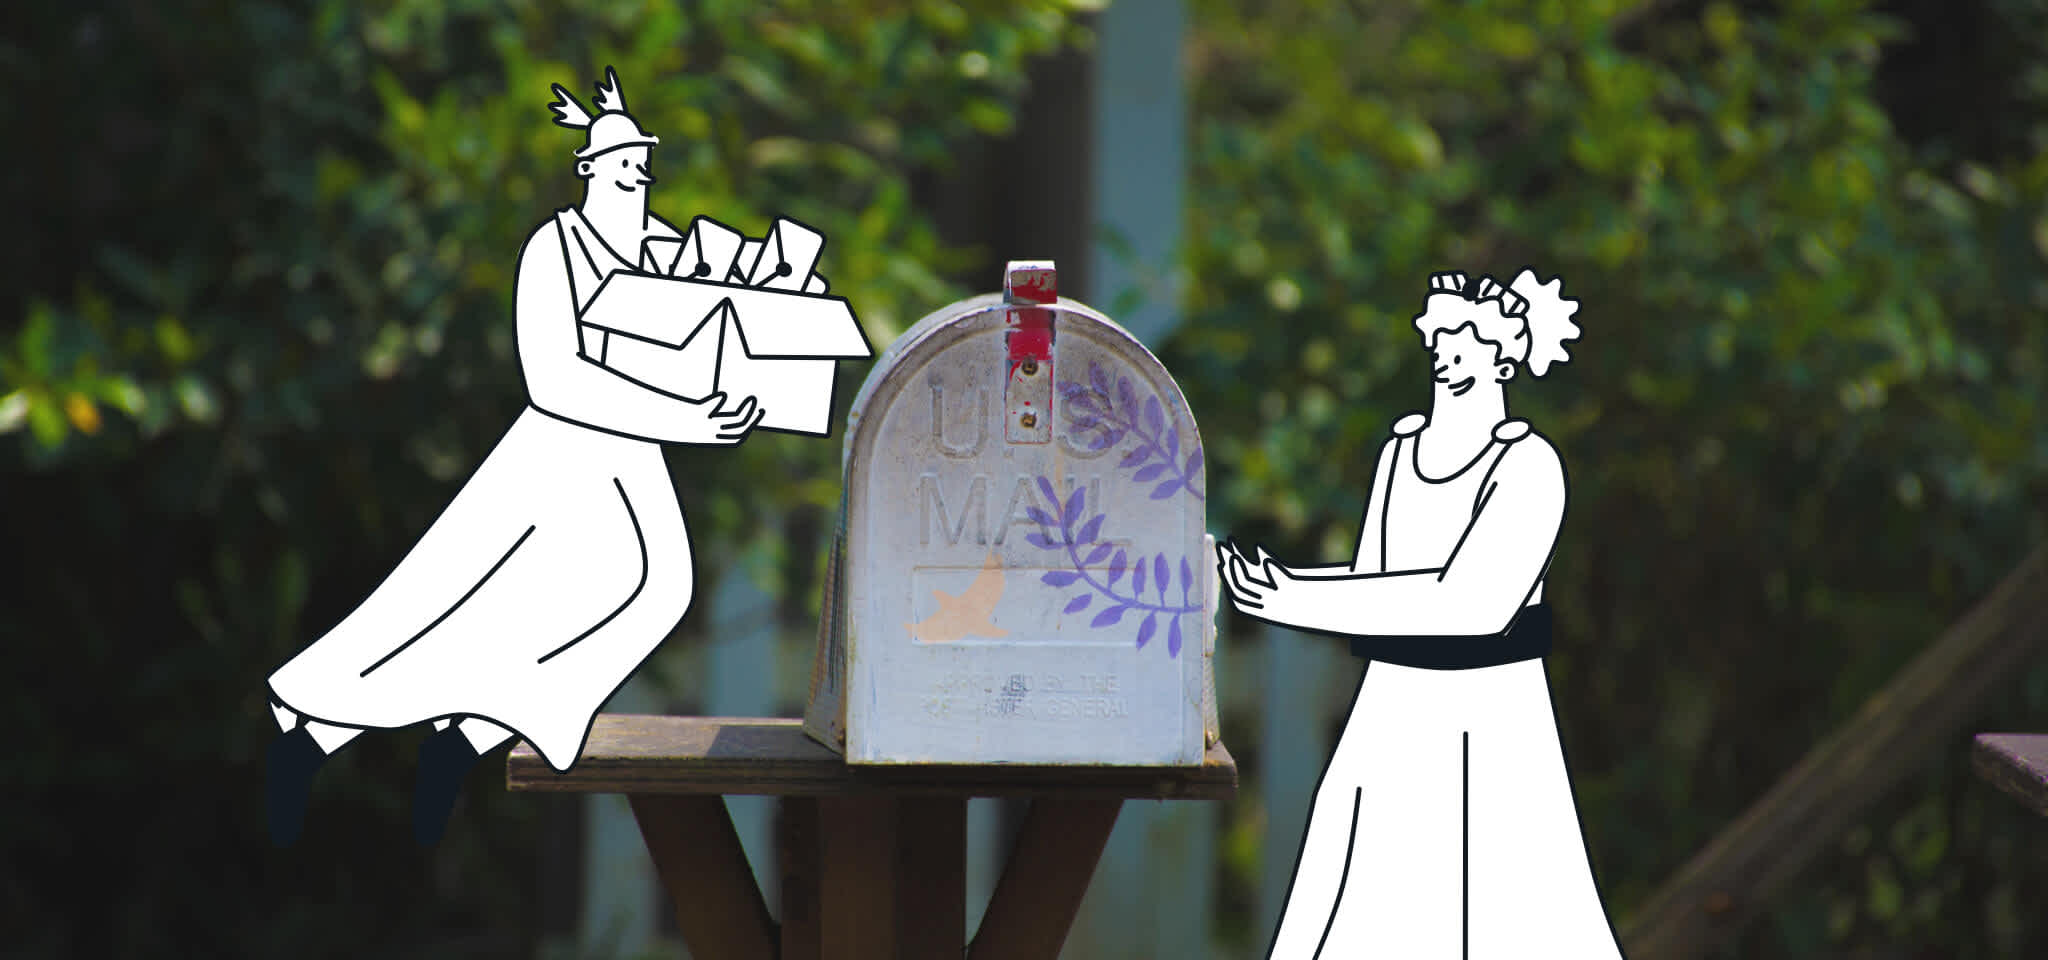 Hermes and a Goddess deliver mail to a cute mailbox